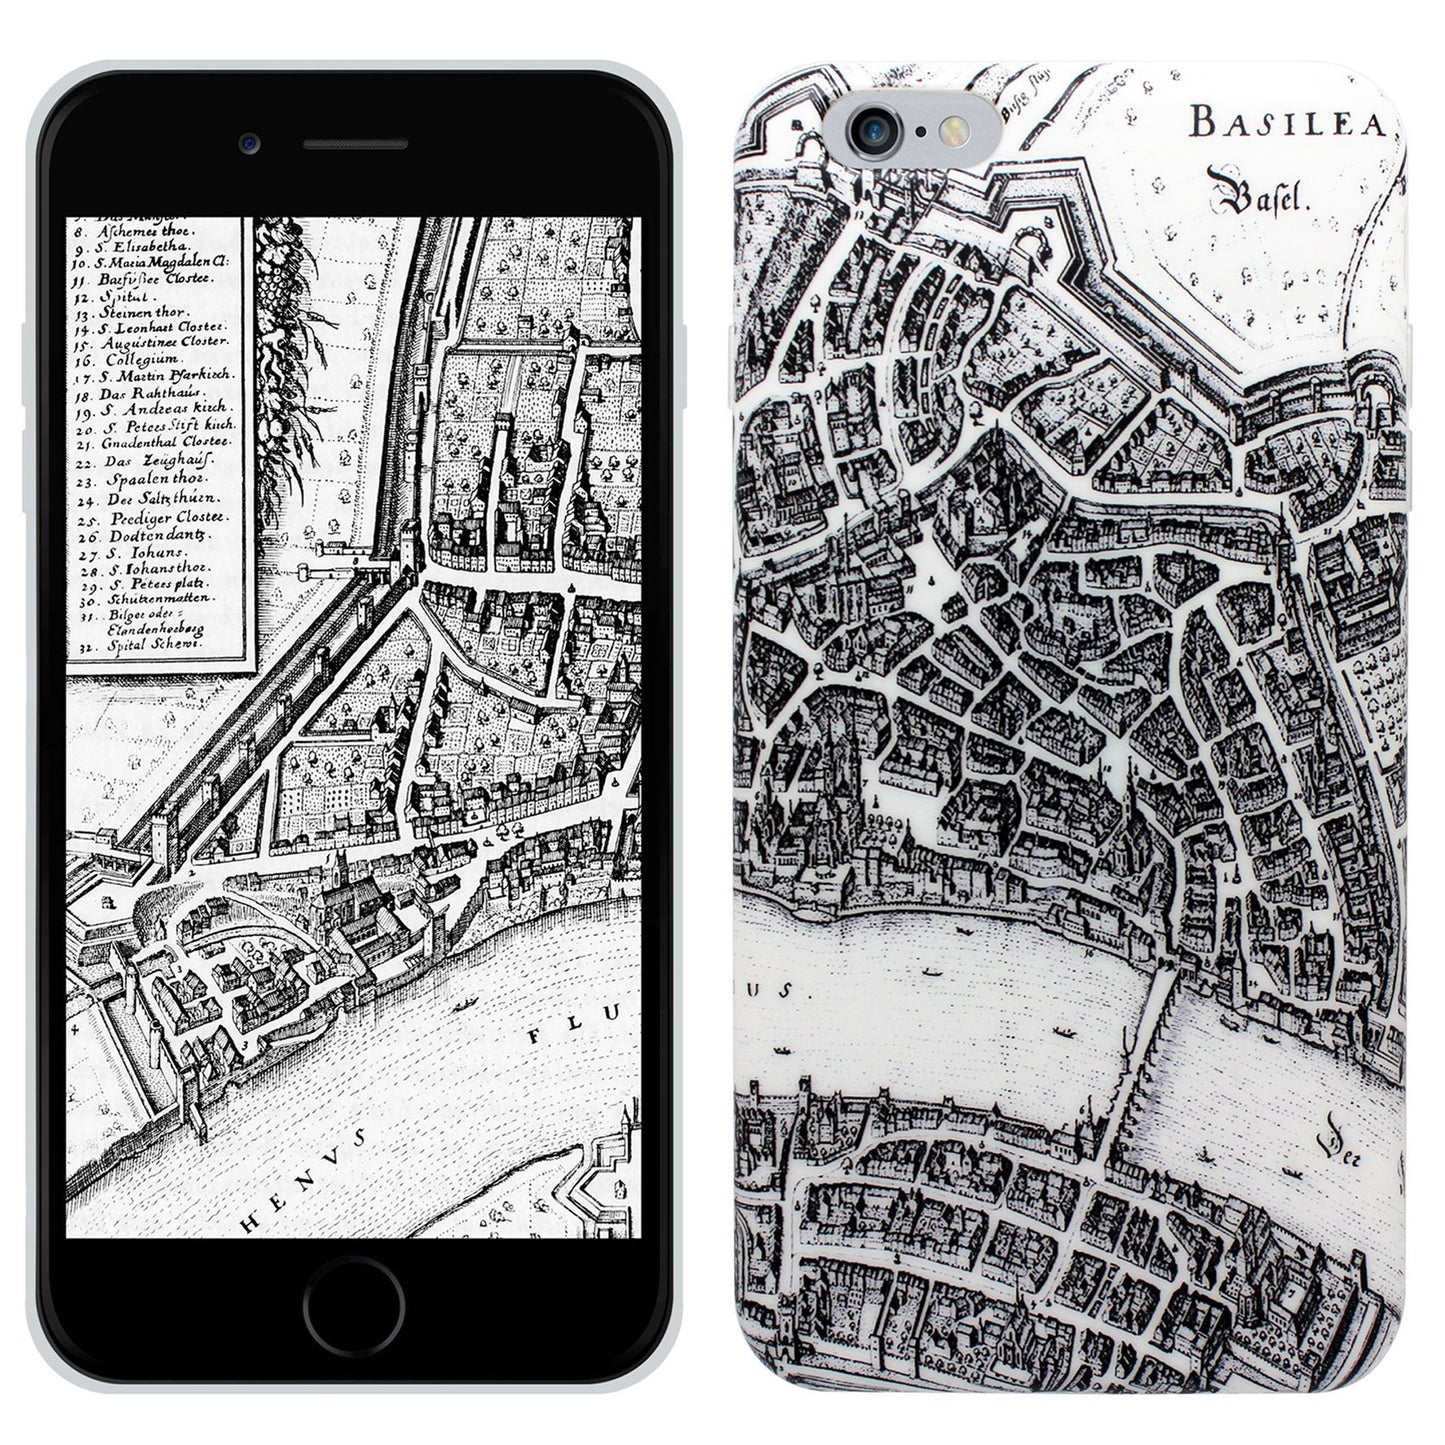 Basel Merian 360° Case for iPhone 6/6S